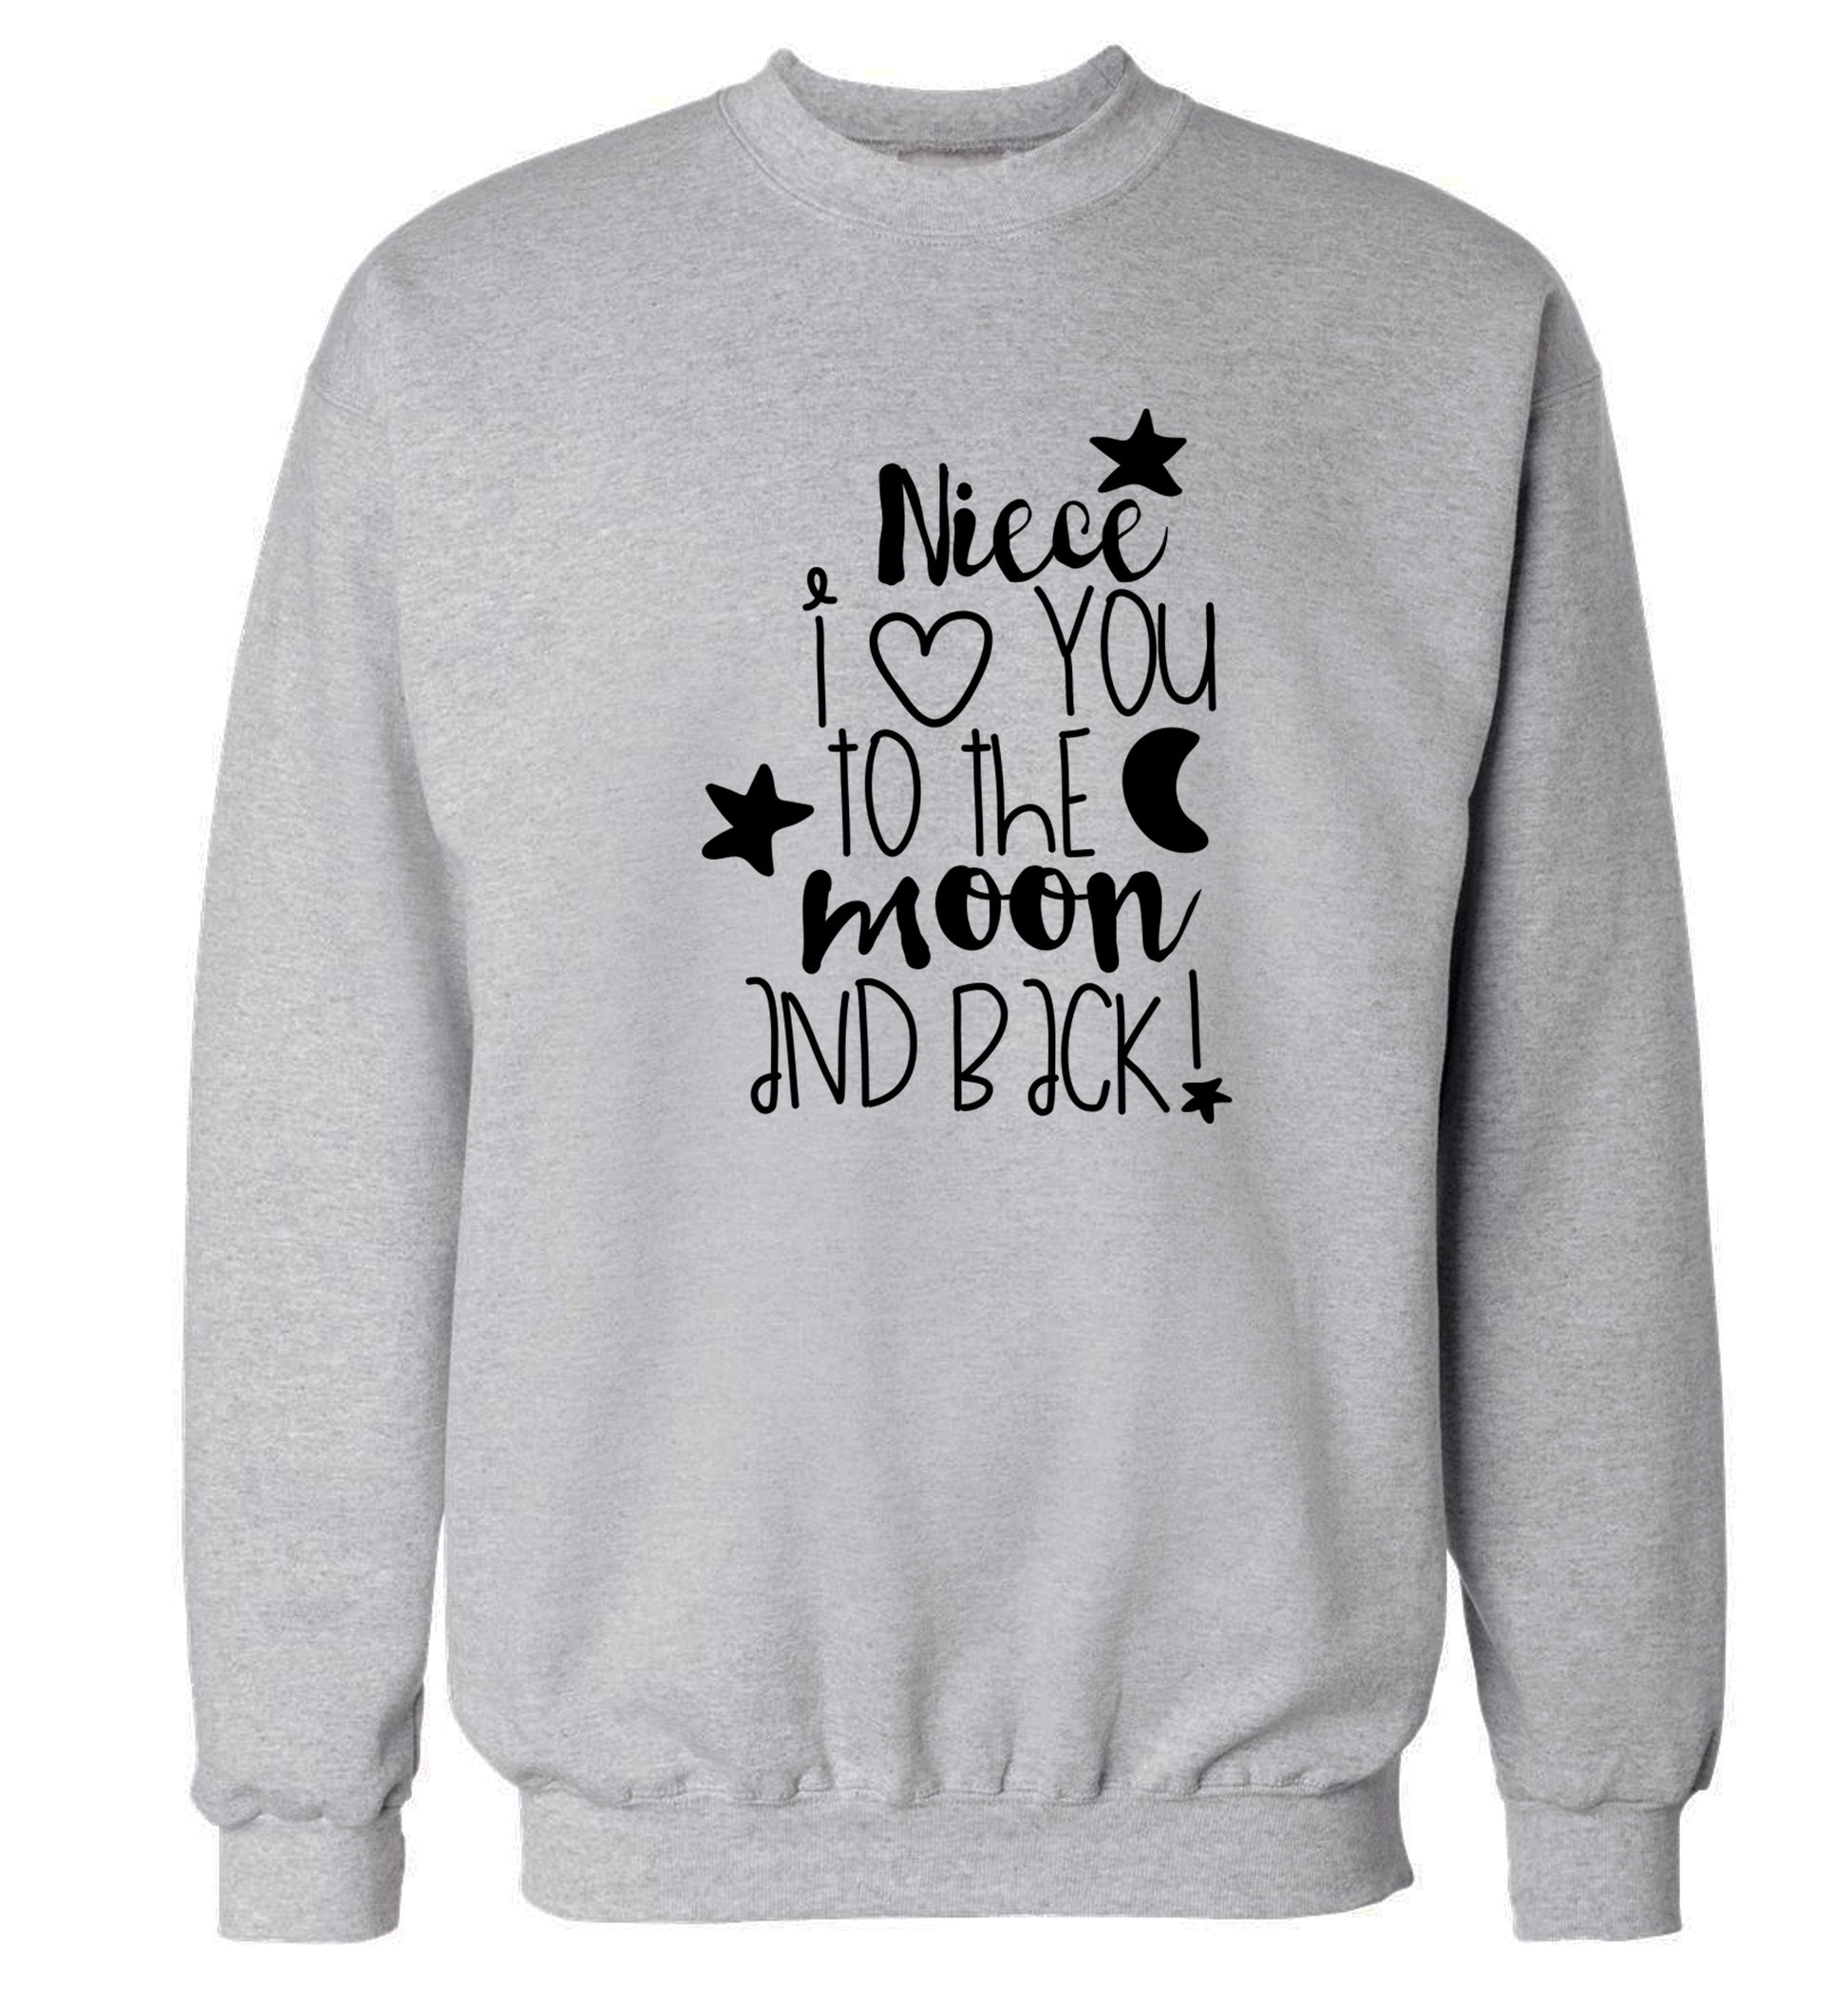 Niece I love you to the moon and back Adult's unisex grey  sweater 2XL